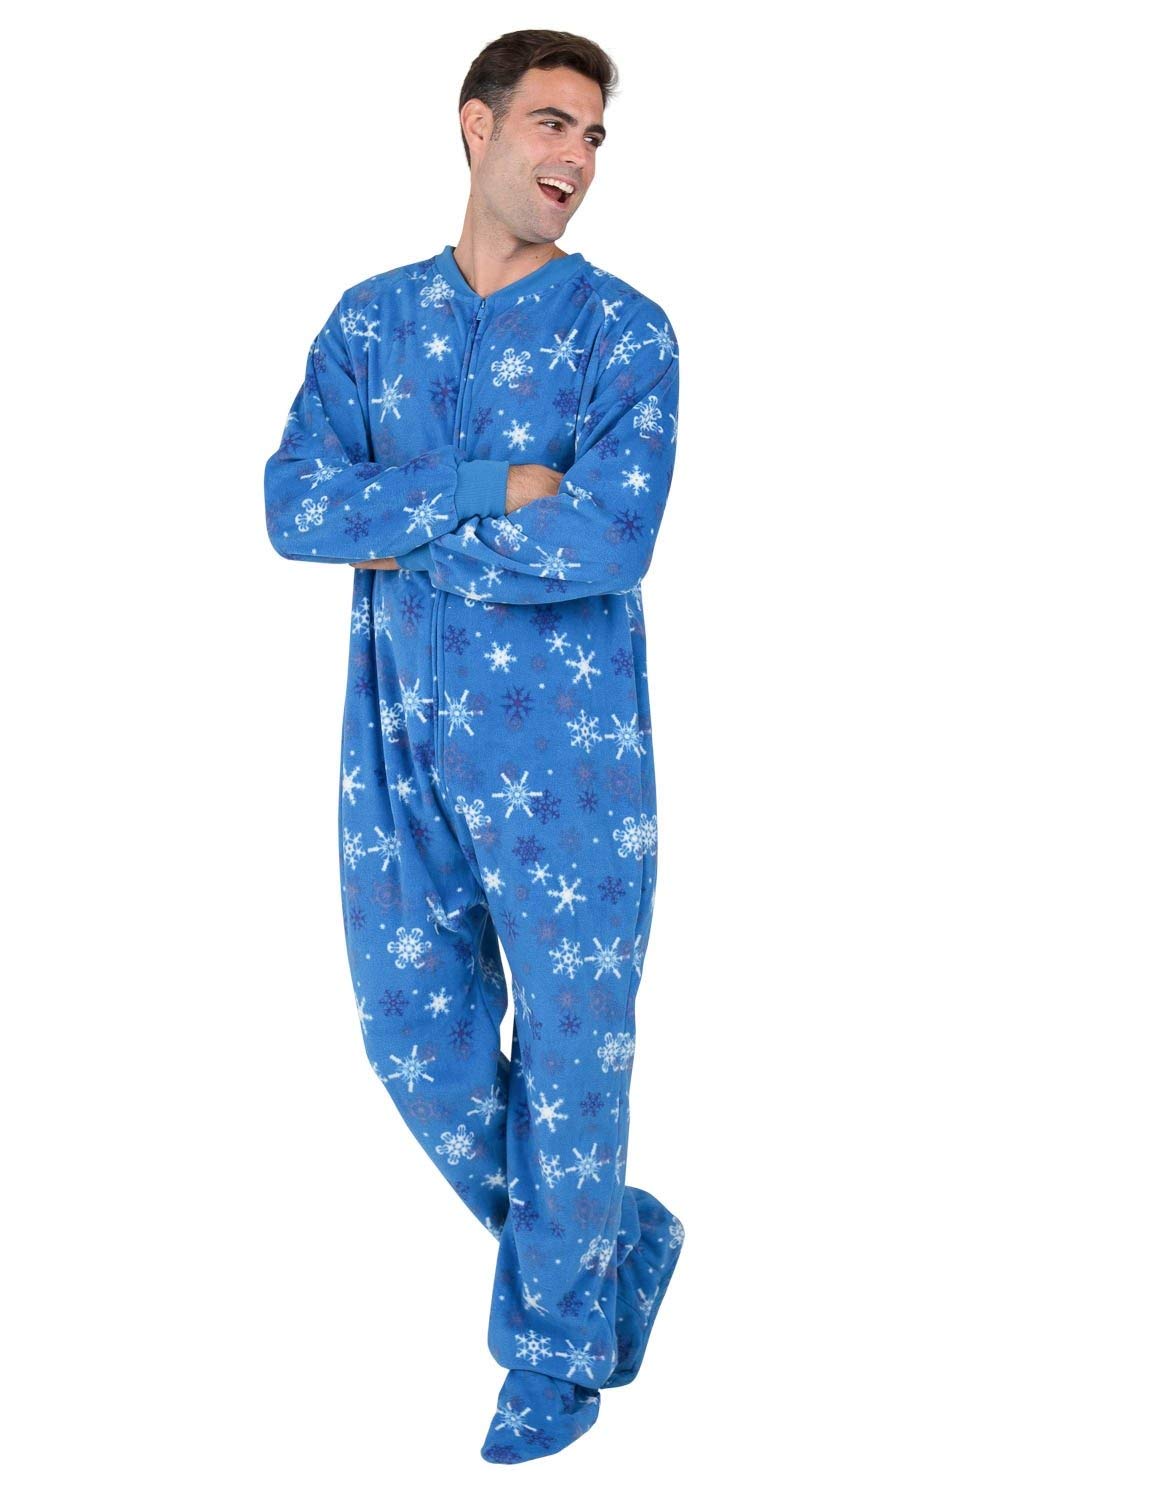 Footed Pajamas - Its A Snow Day Adult Fleece One Piece - Adult - XSmall (Fits 5'2-5'4")